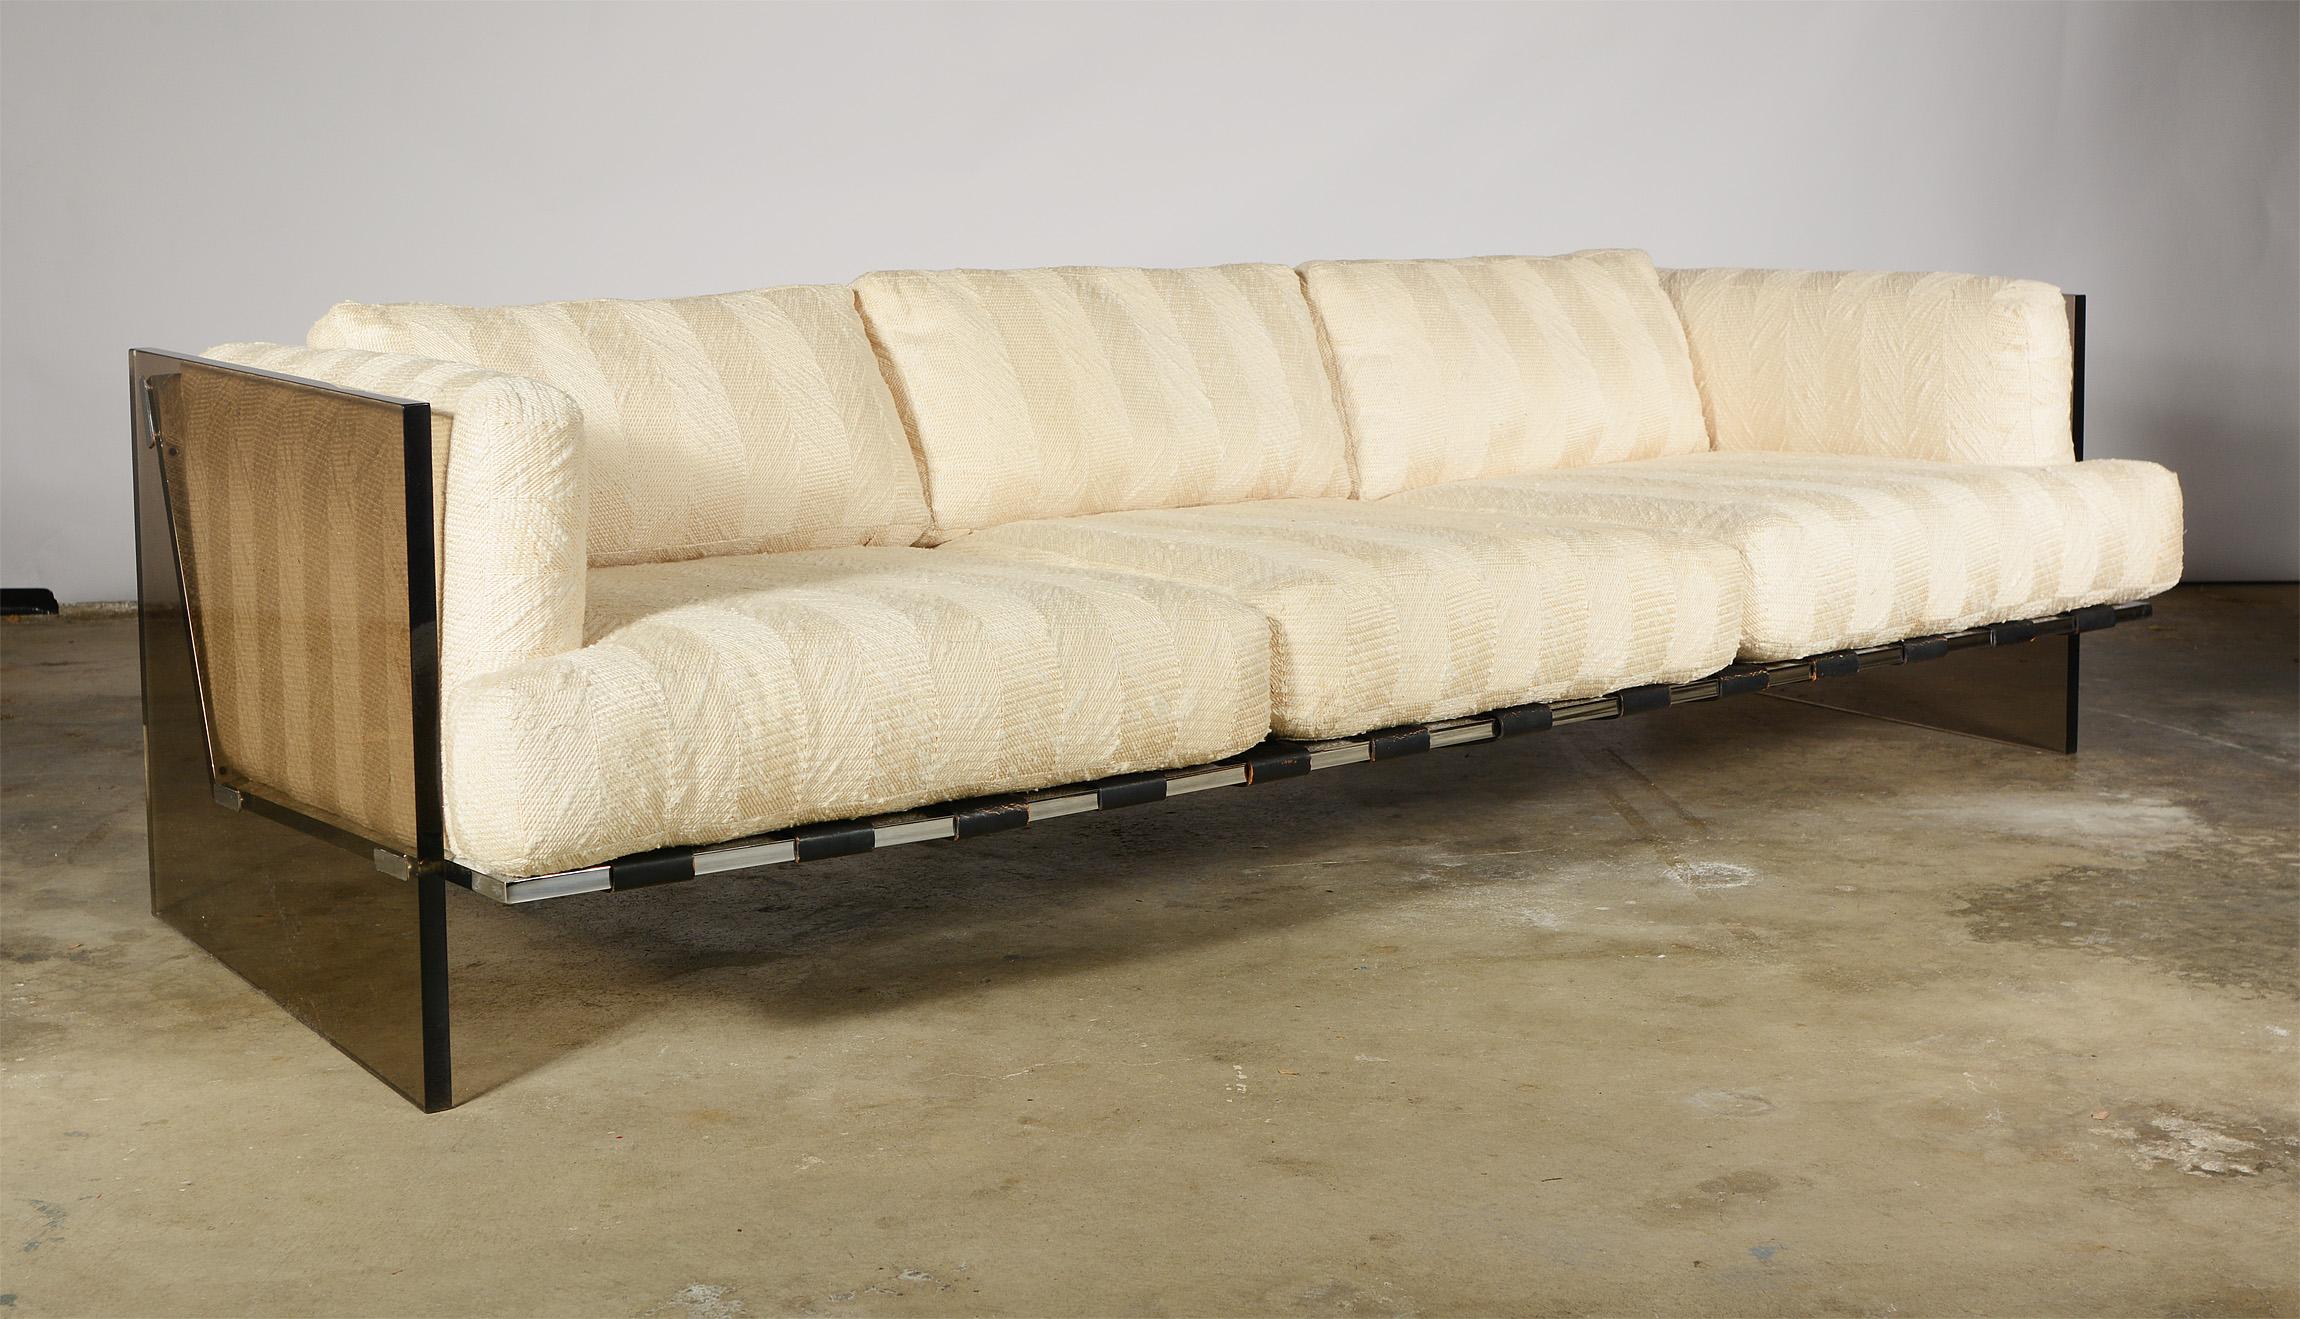 Three-seat sofa with slab smoked bronze acrylic sides by Milo Baughman. This chair has a chrome frame with wide black leather straps to support the cushions. The acrylic shows light wear. One side has a couple of scratches, a deep scratch on the